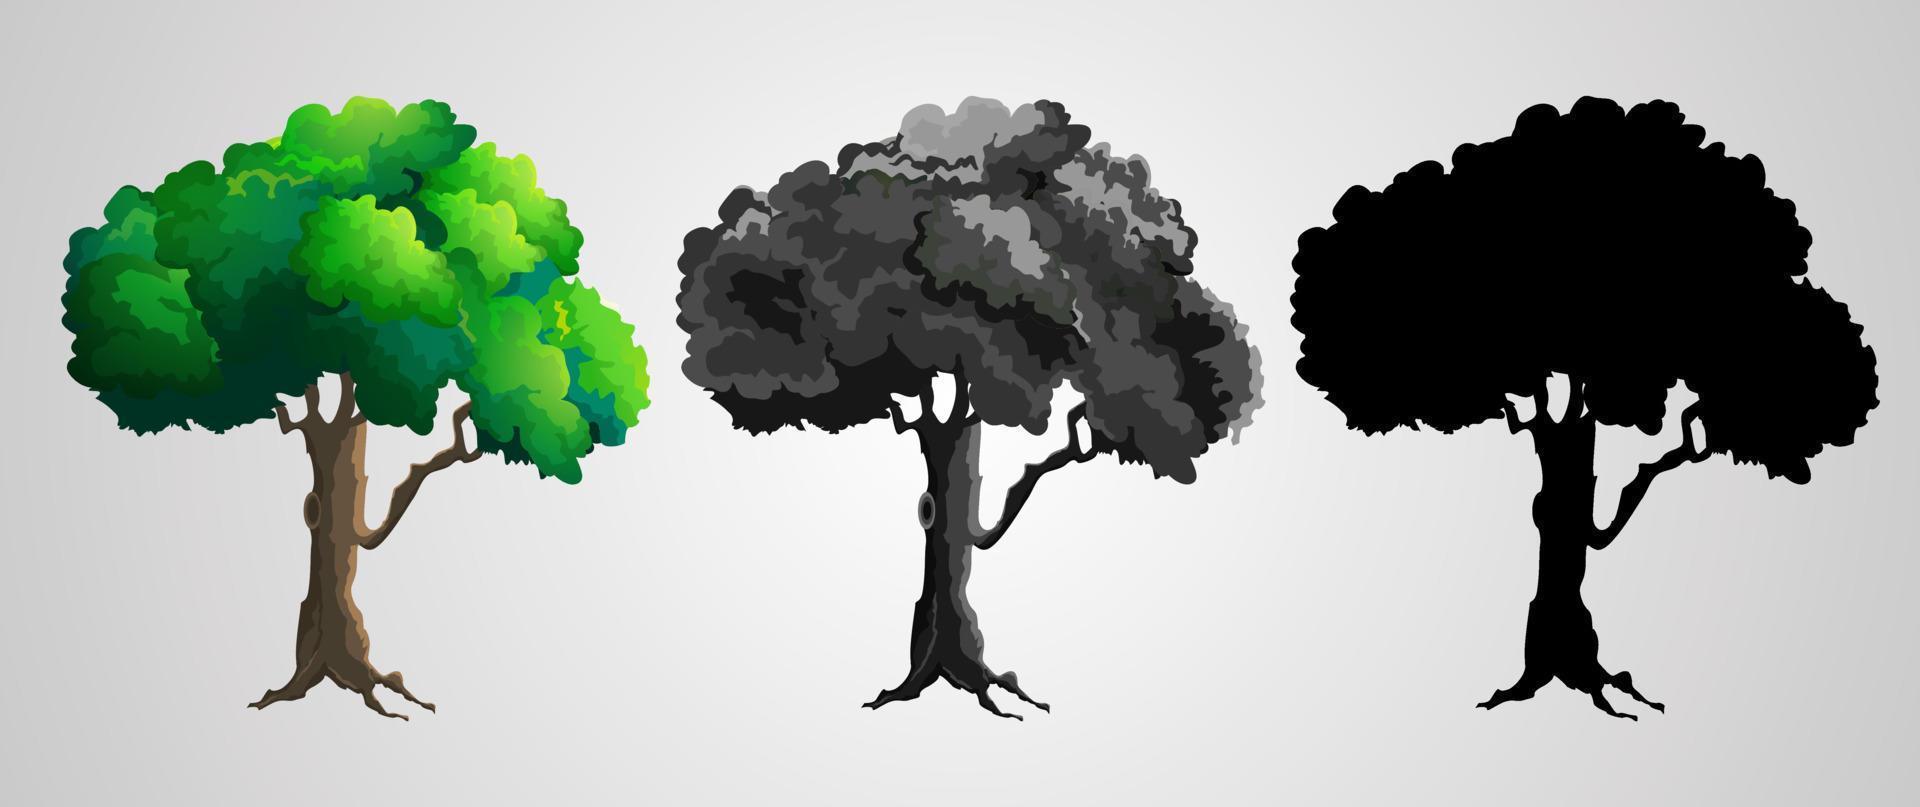 Trees icon with silhouette of trees on a gradient background vector